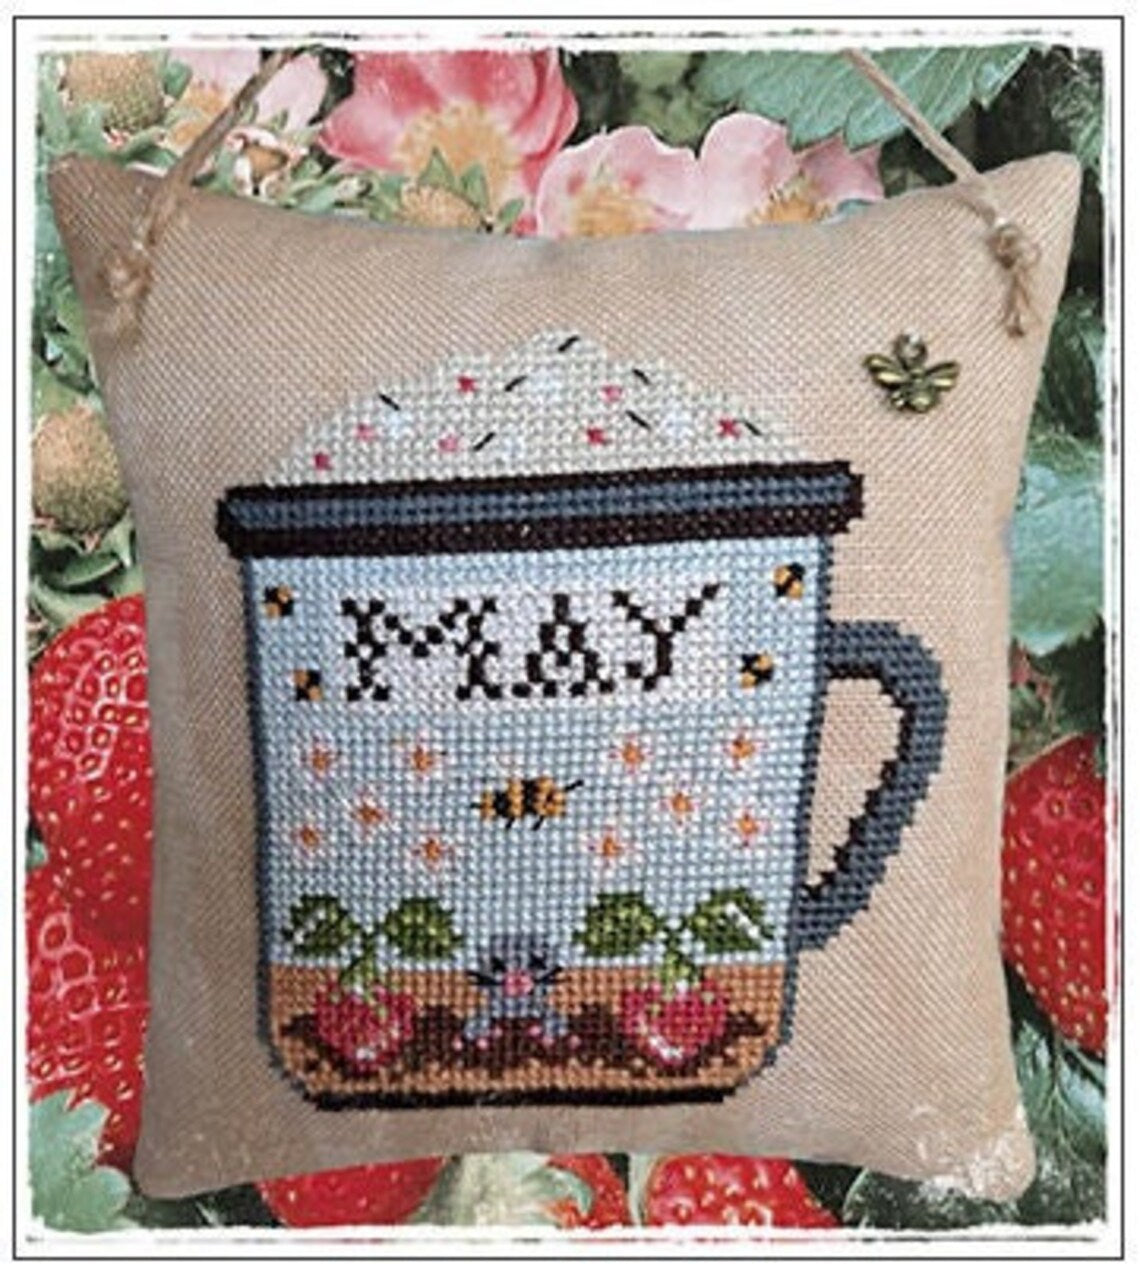 Months in a Mug: May - Fairy Wool in the Wood - Cross Stitch Pattern